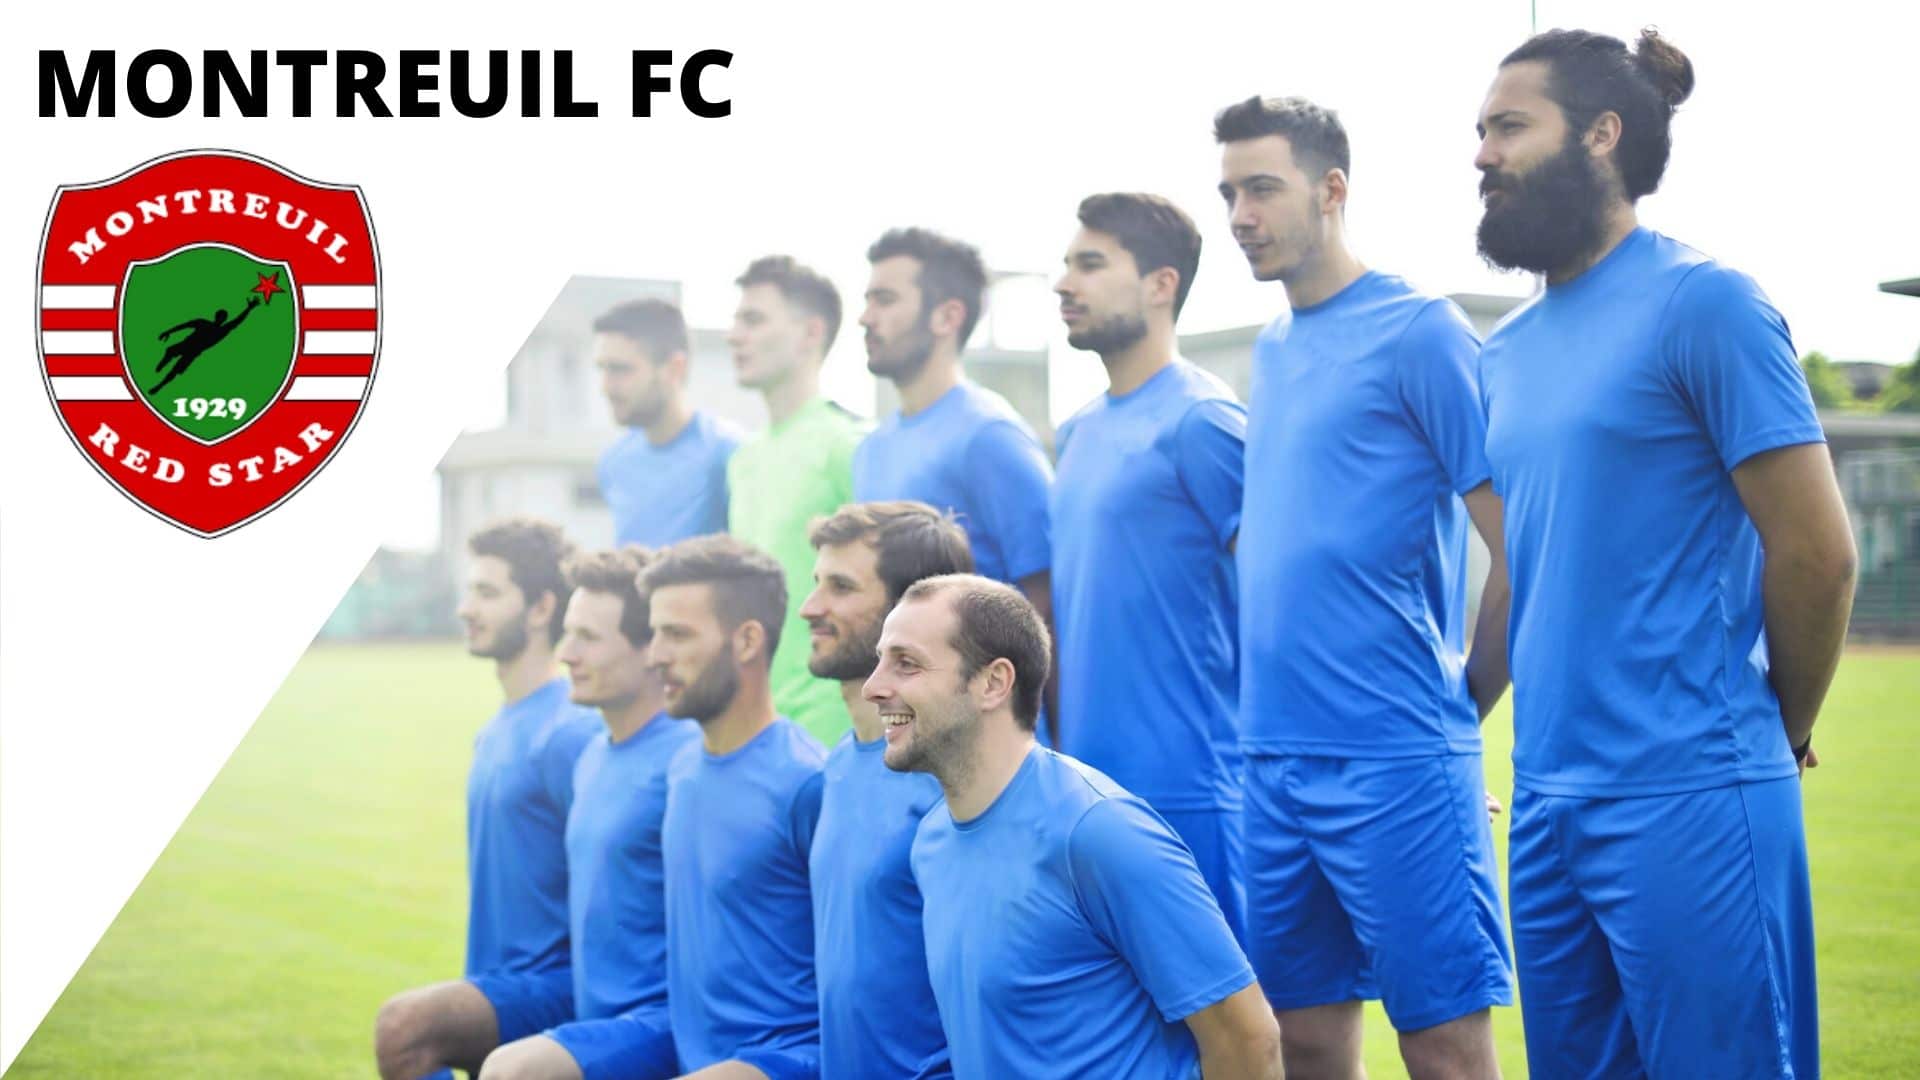 MONTREUIL FC-93 (2)